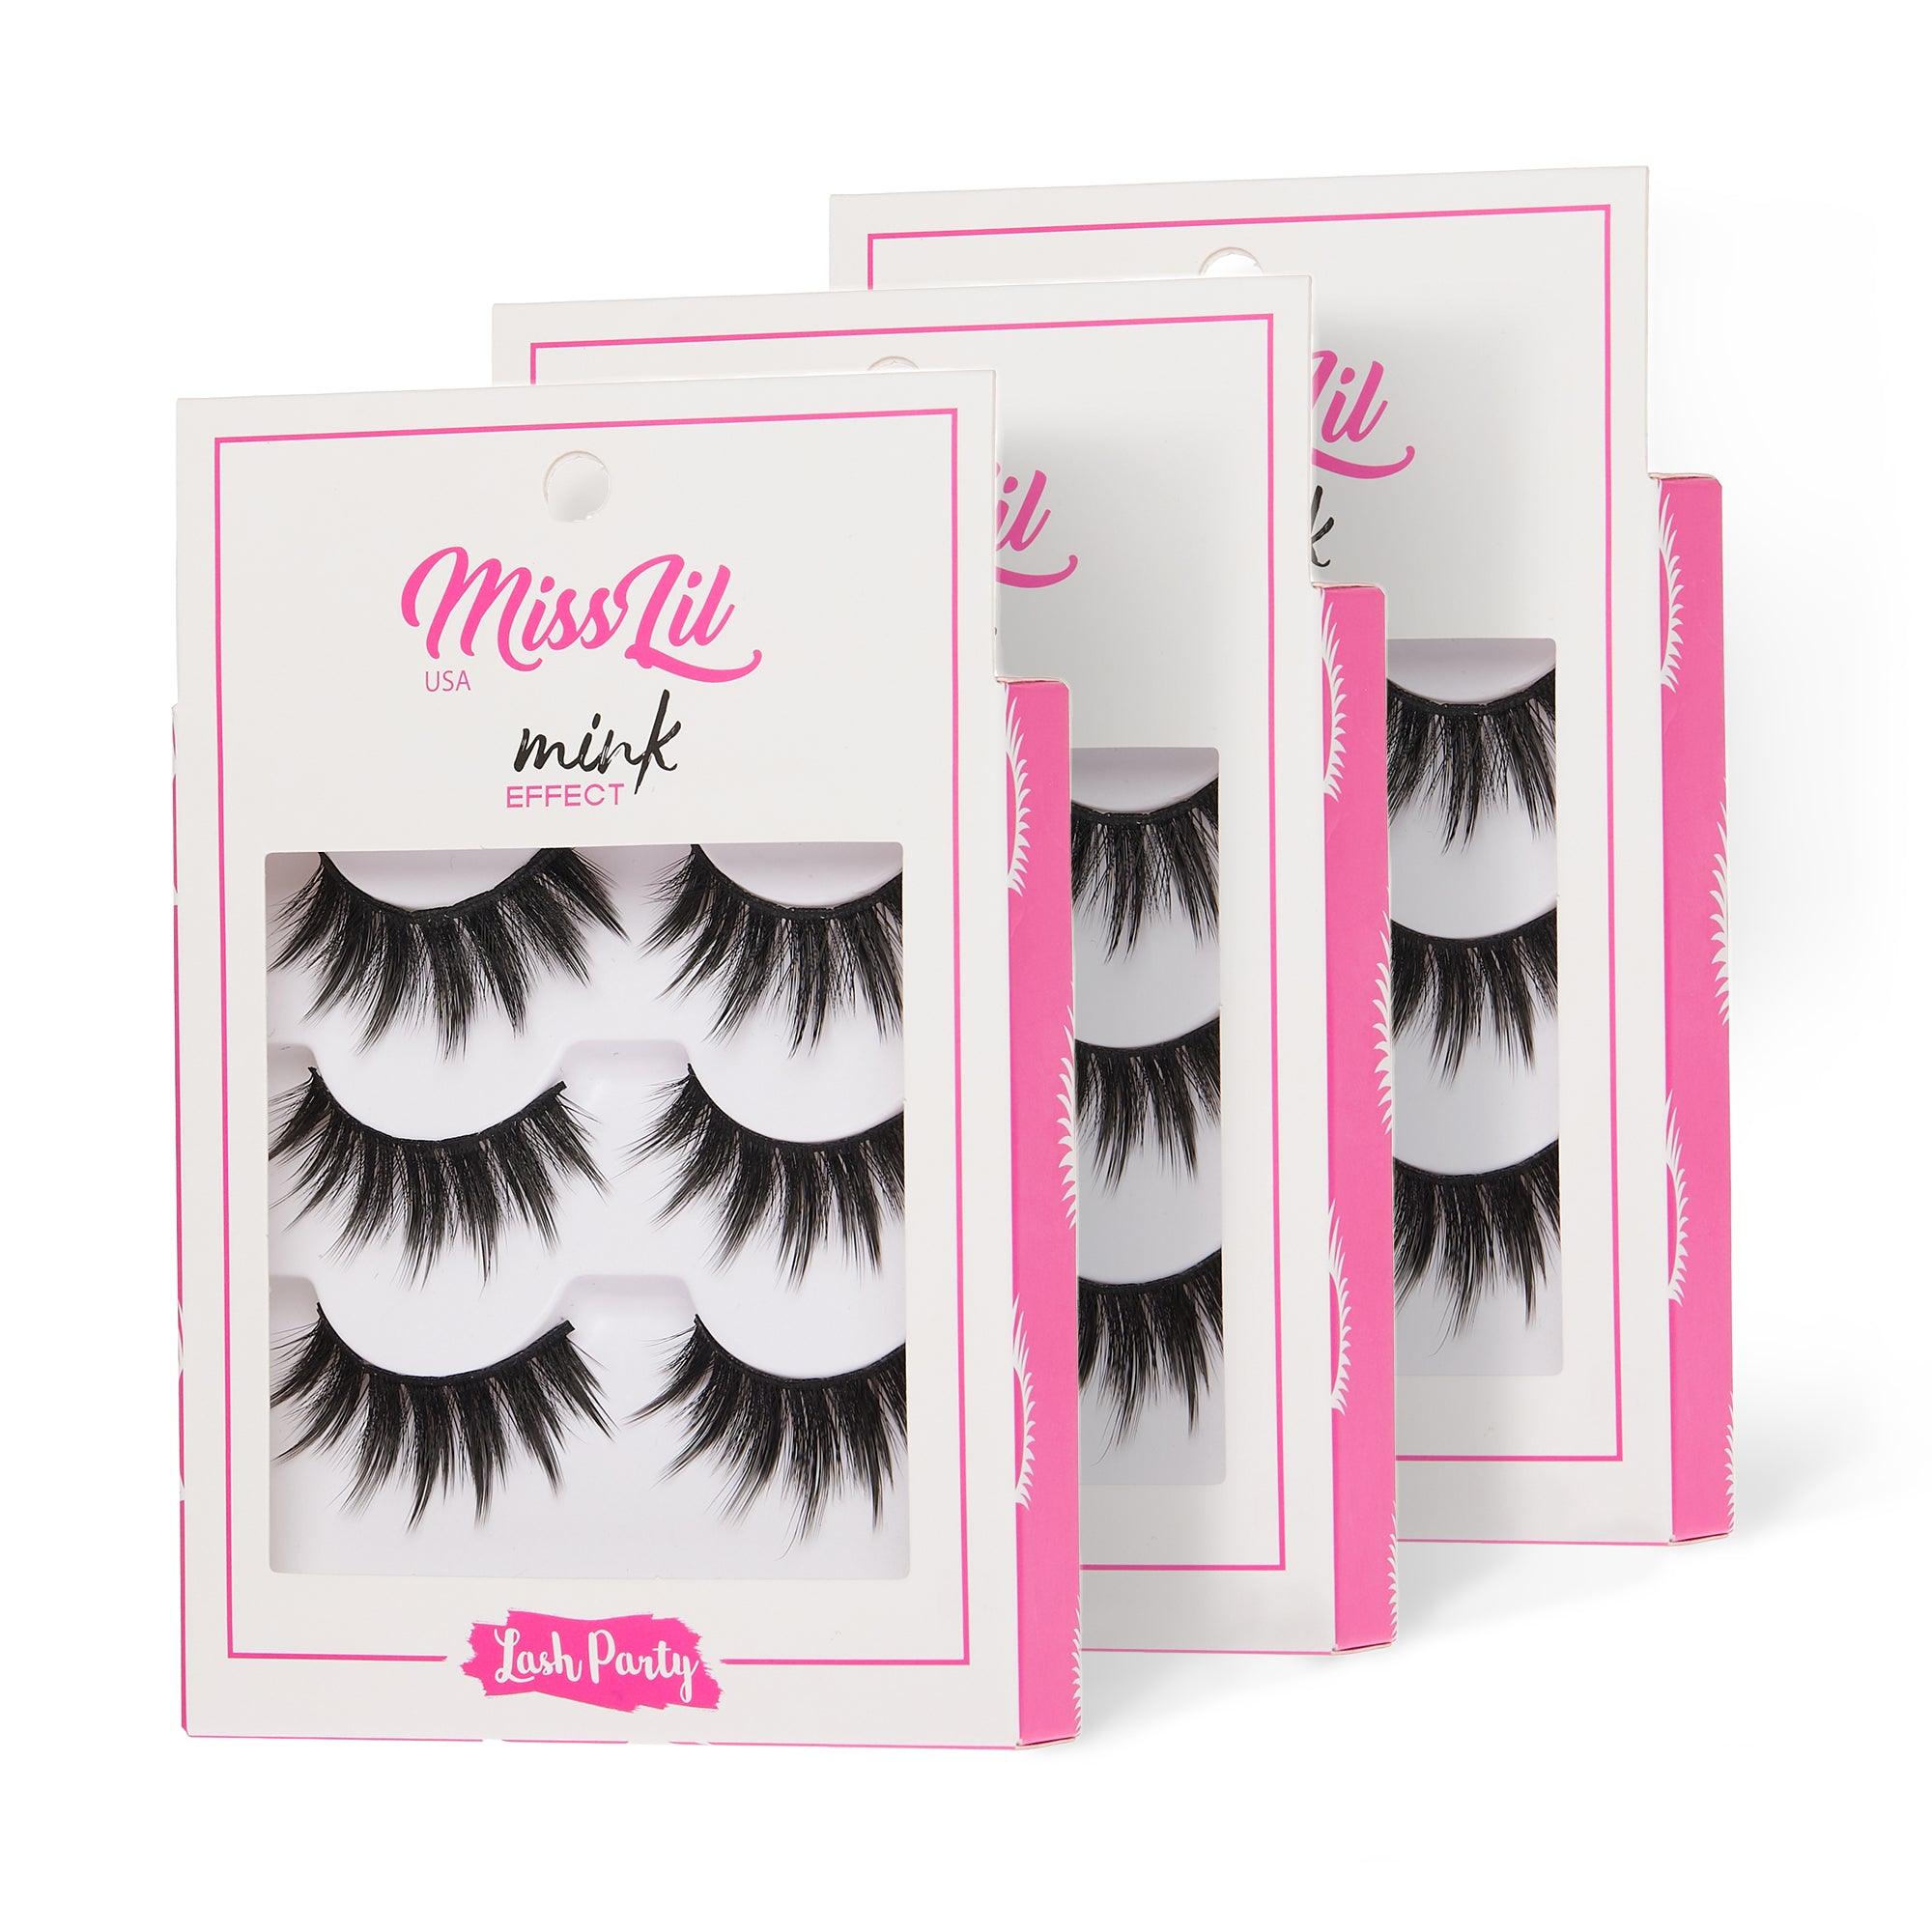 3-Pair Faux Mink Effect Eyelashes - Lash Party Collection #30 - Pack of 3 - Miss Lil USA